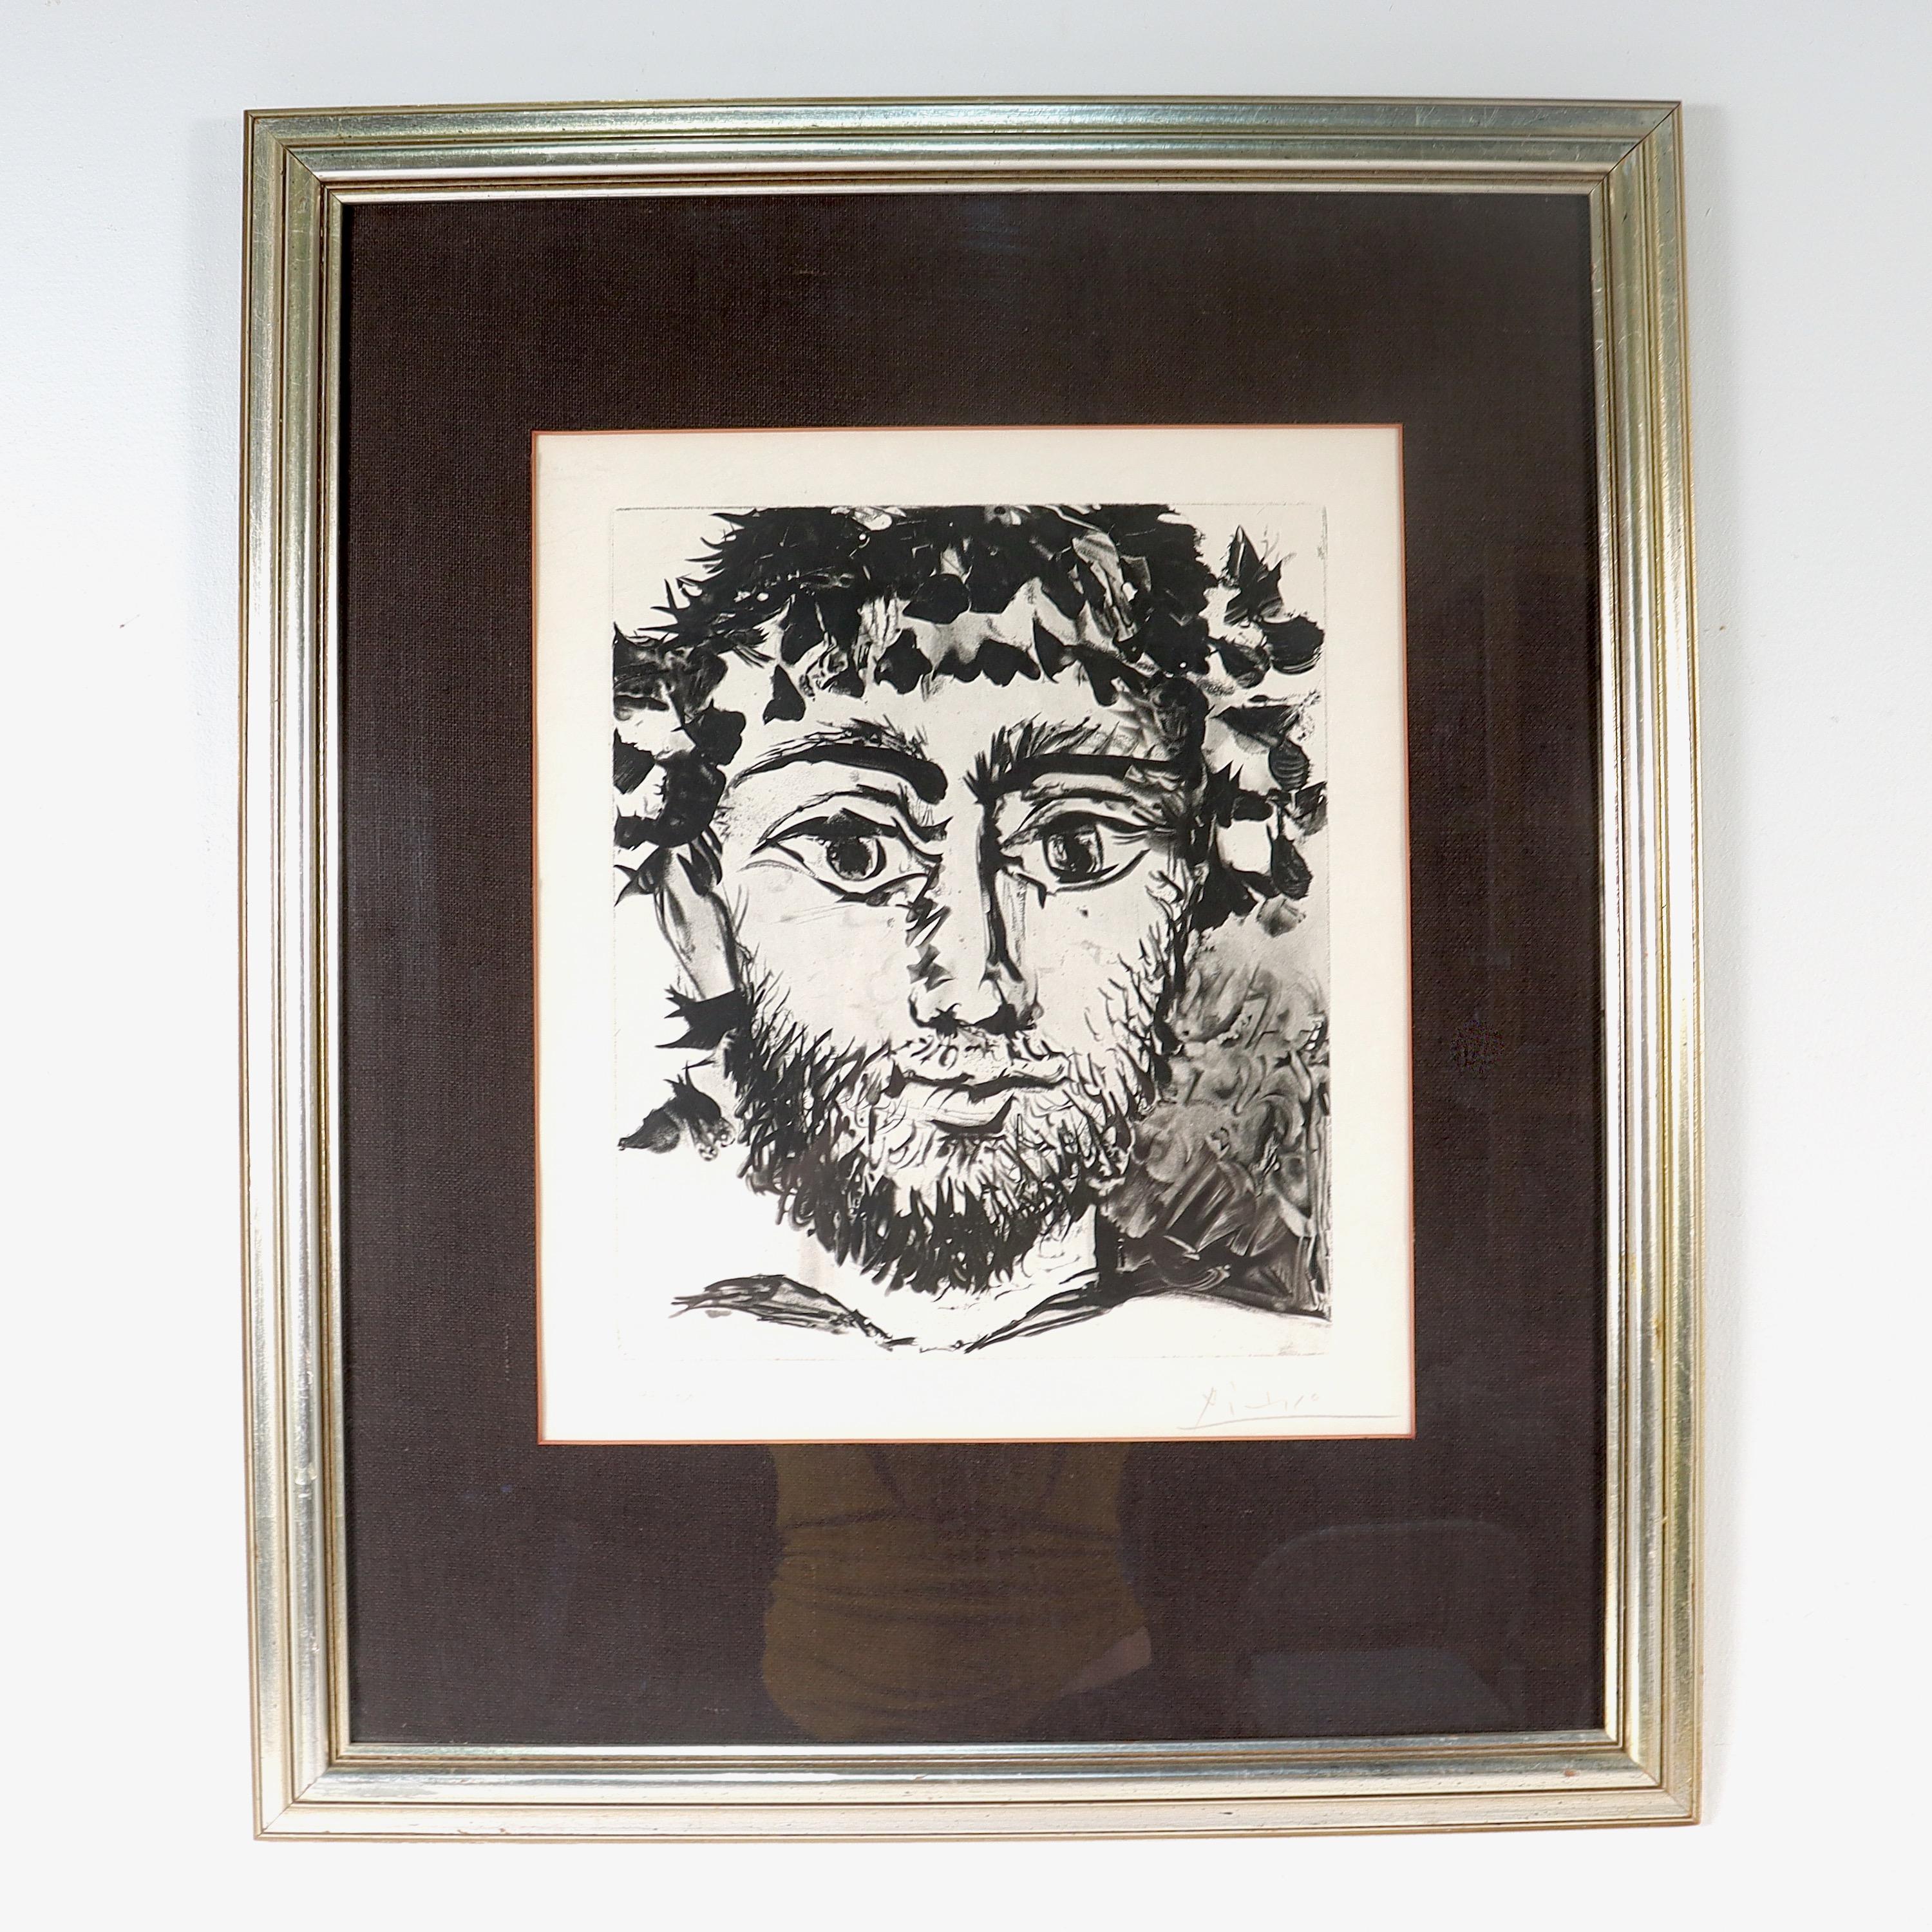 A fine framed etching & aquatint on Japan paper.

By Pablo Picasso (1881 - 1973)

Entitled 